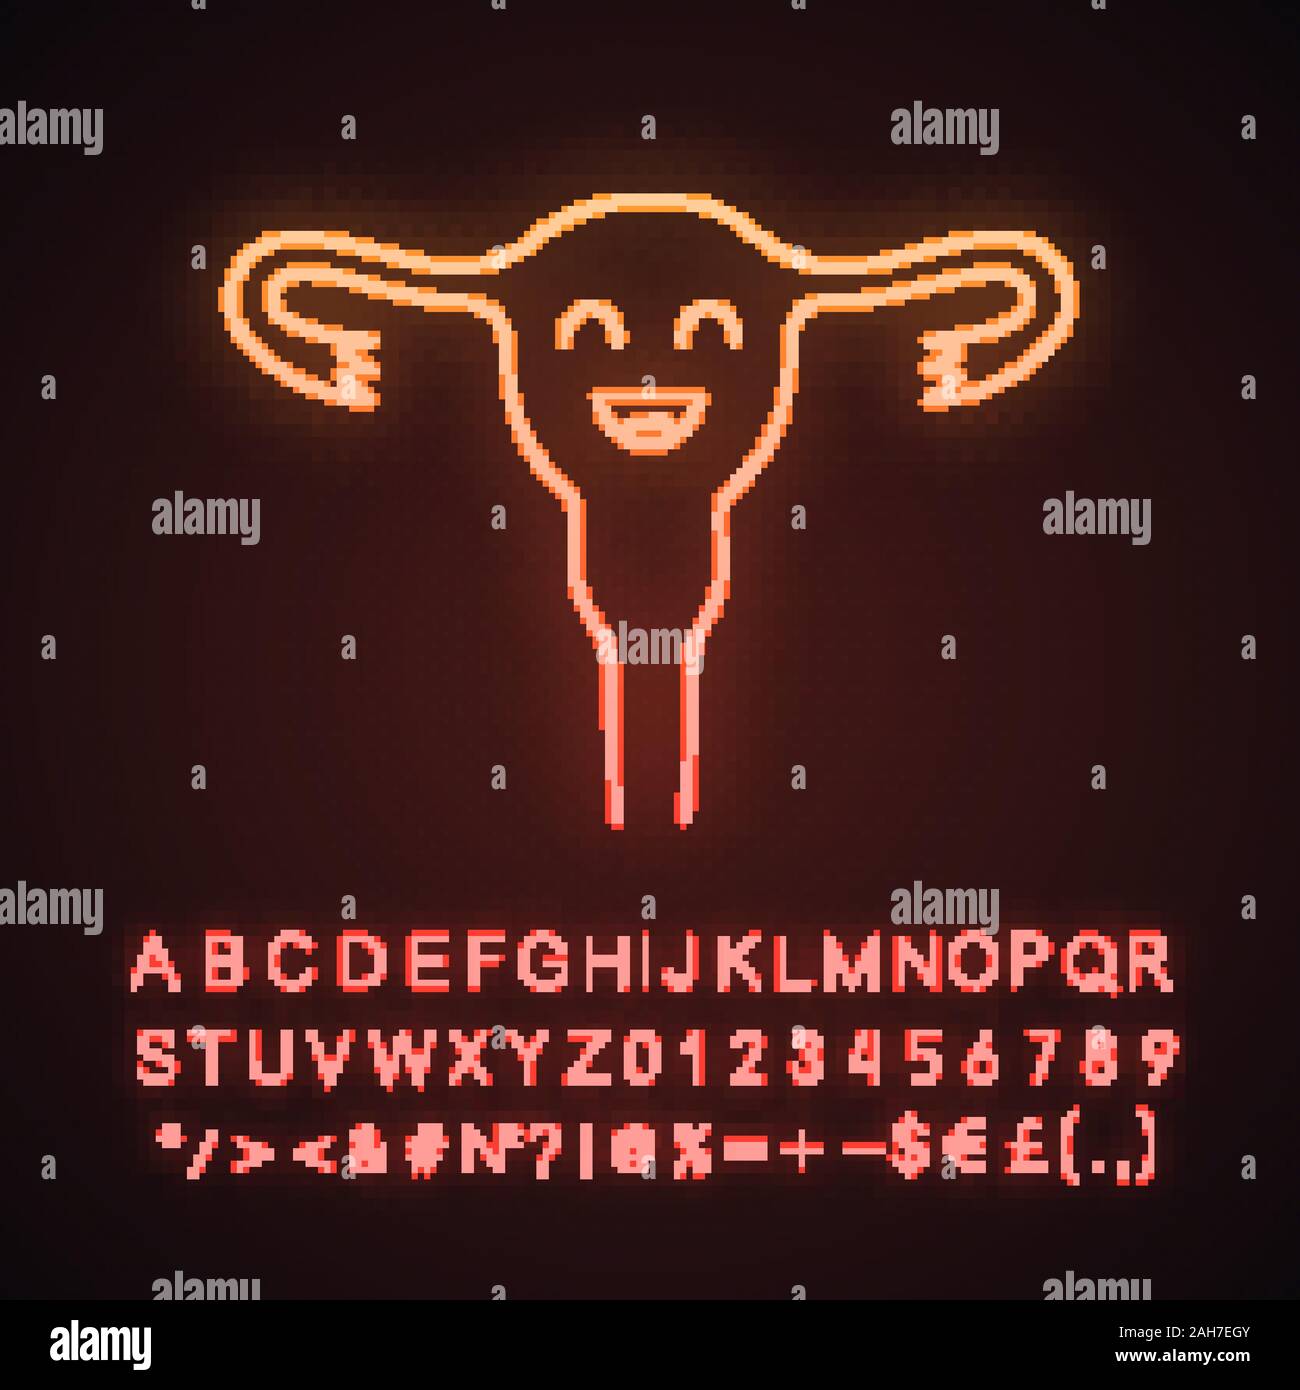 Smiling uterus neon light icon. Women's health. Fertility. Healthy female reproductive system. Glowing sign with alphabet, numbers and symbols. Vector Stock Vector